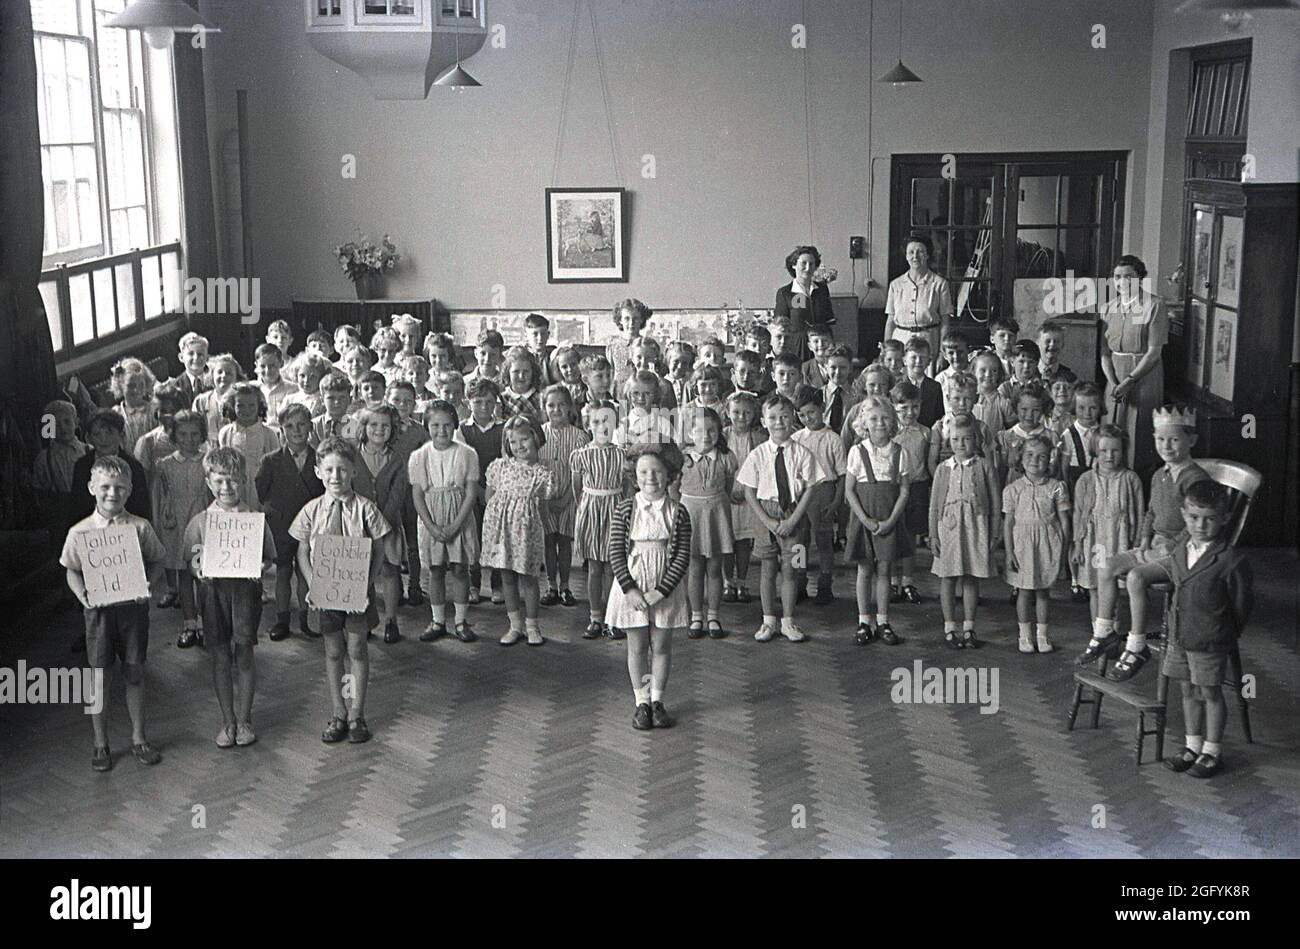 1955, historical, school assembly at a Primary school, school pupils standing for a group picture with three young boys at the front of the group holding up cards, saying 'Tailor Coat 1d' and Hatter Hat 2d' and Cobble Shoes 3d', England, UK. Stock Photo